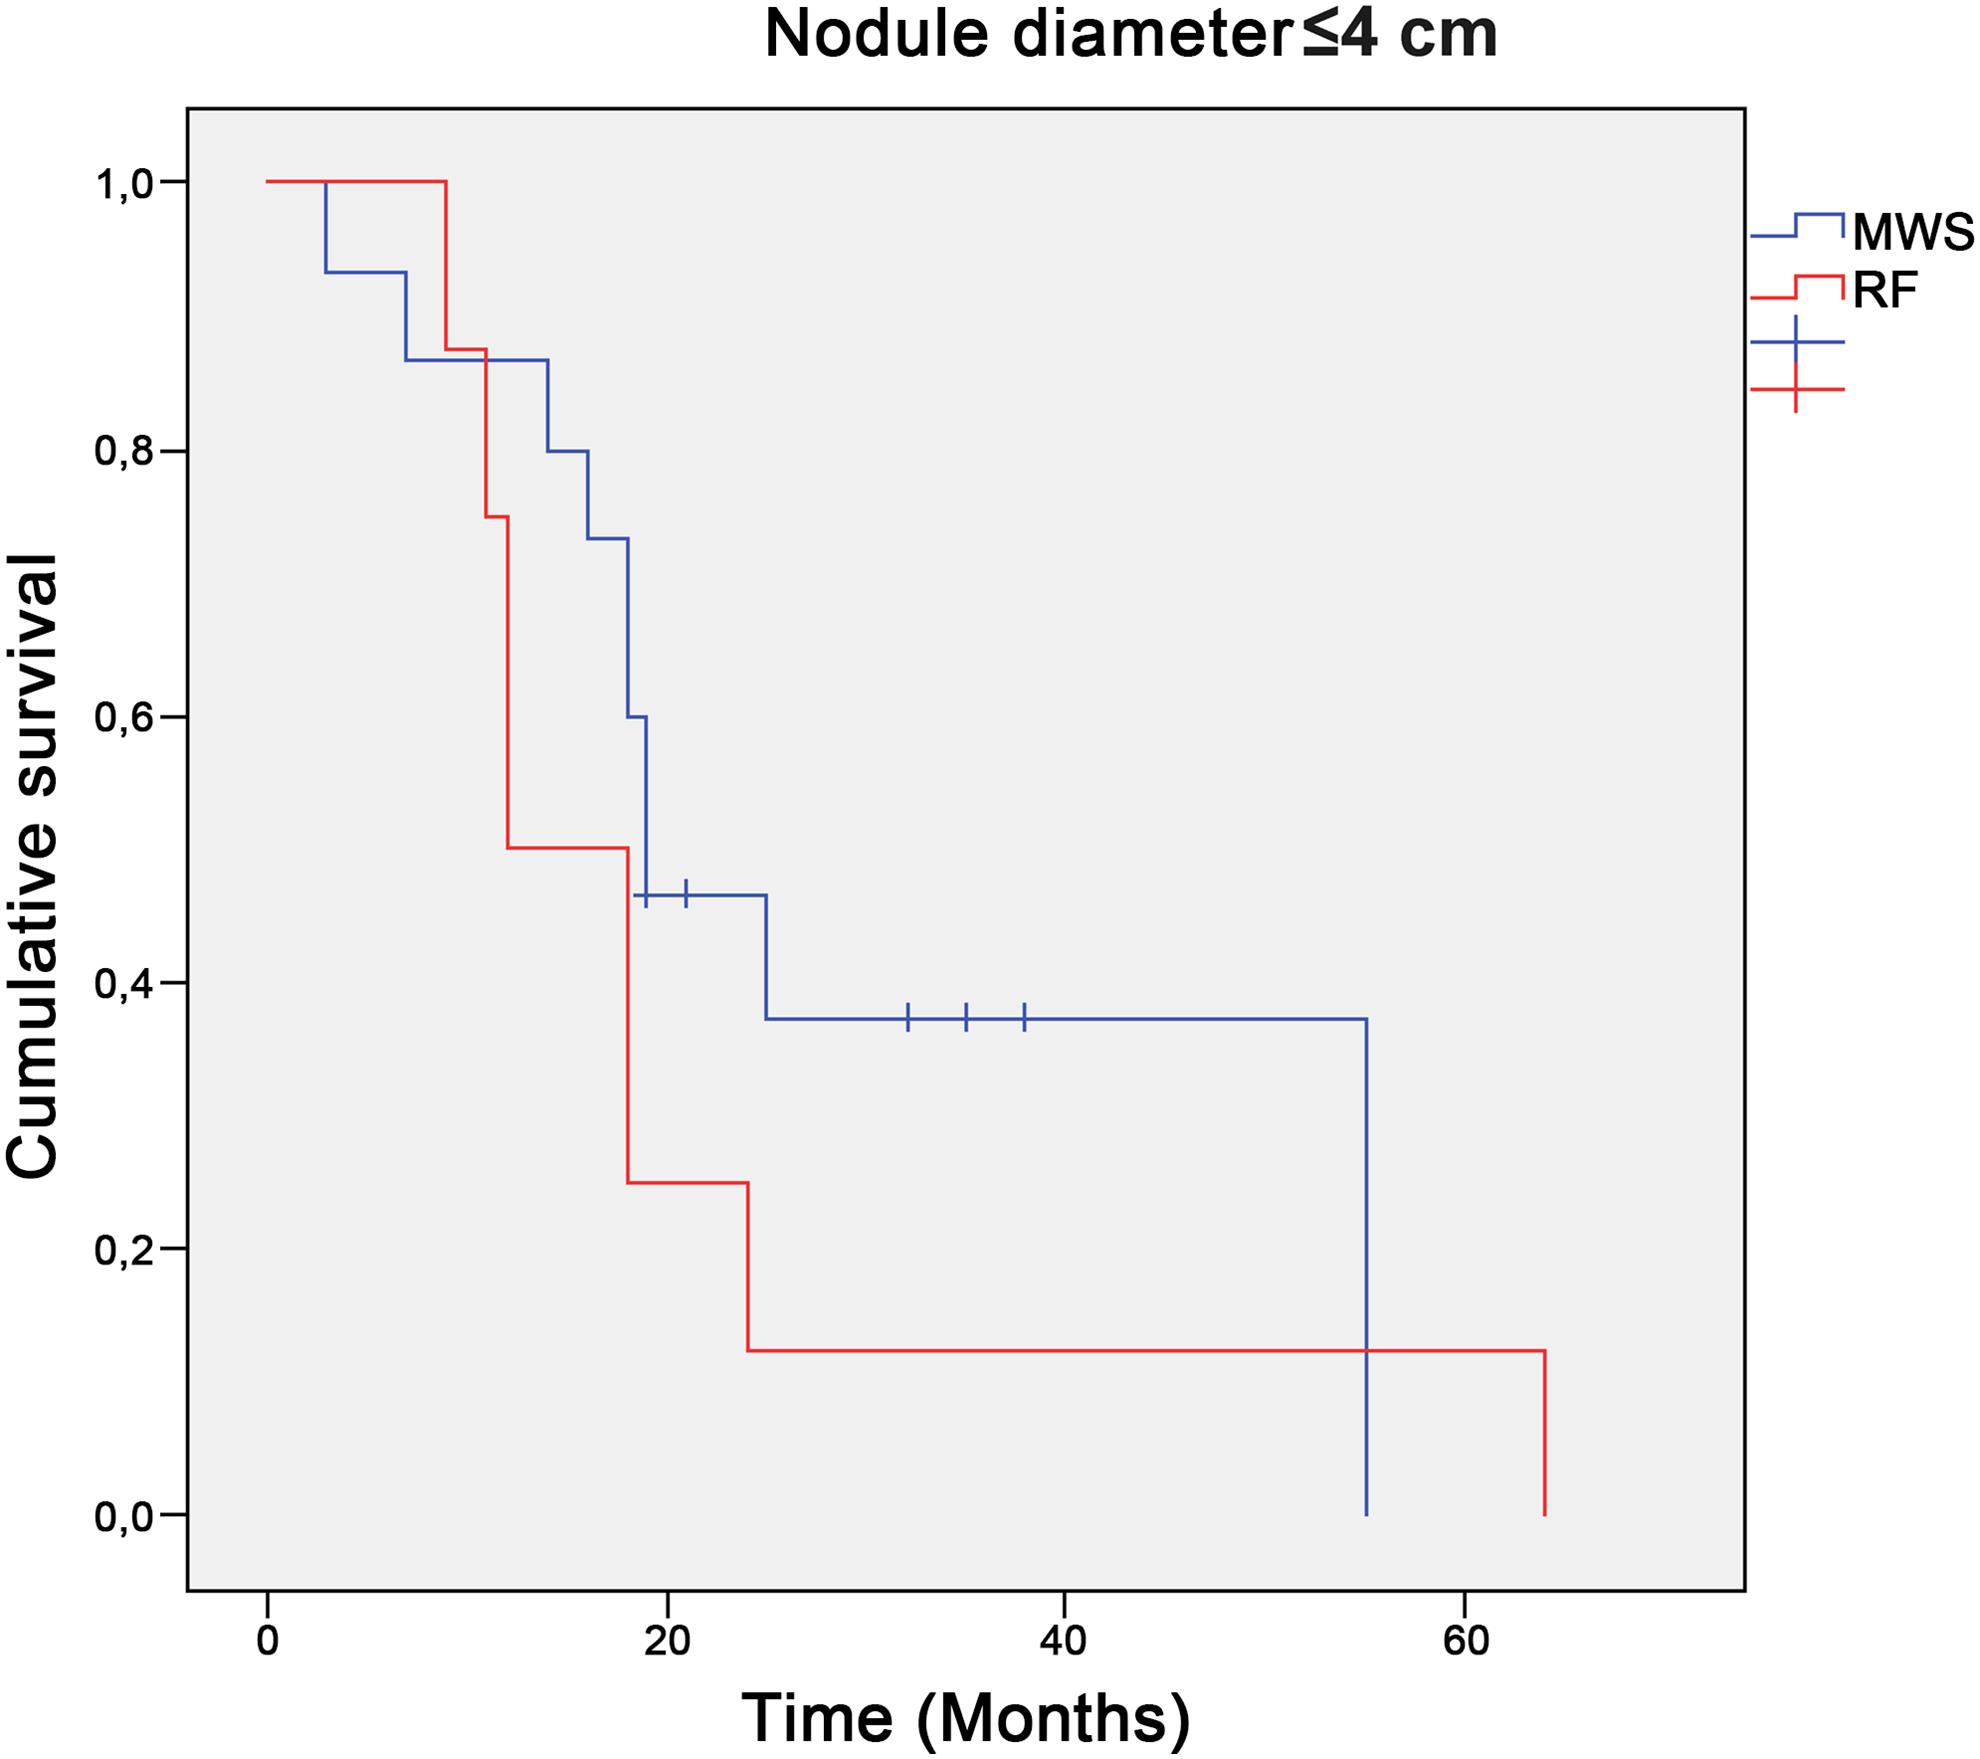 Overall survival of patients with nodules ≤4 cm treated with MWSA vs. patients treated with RFA.